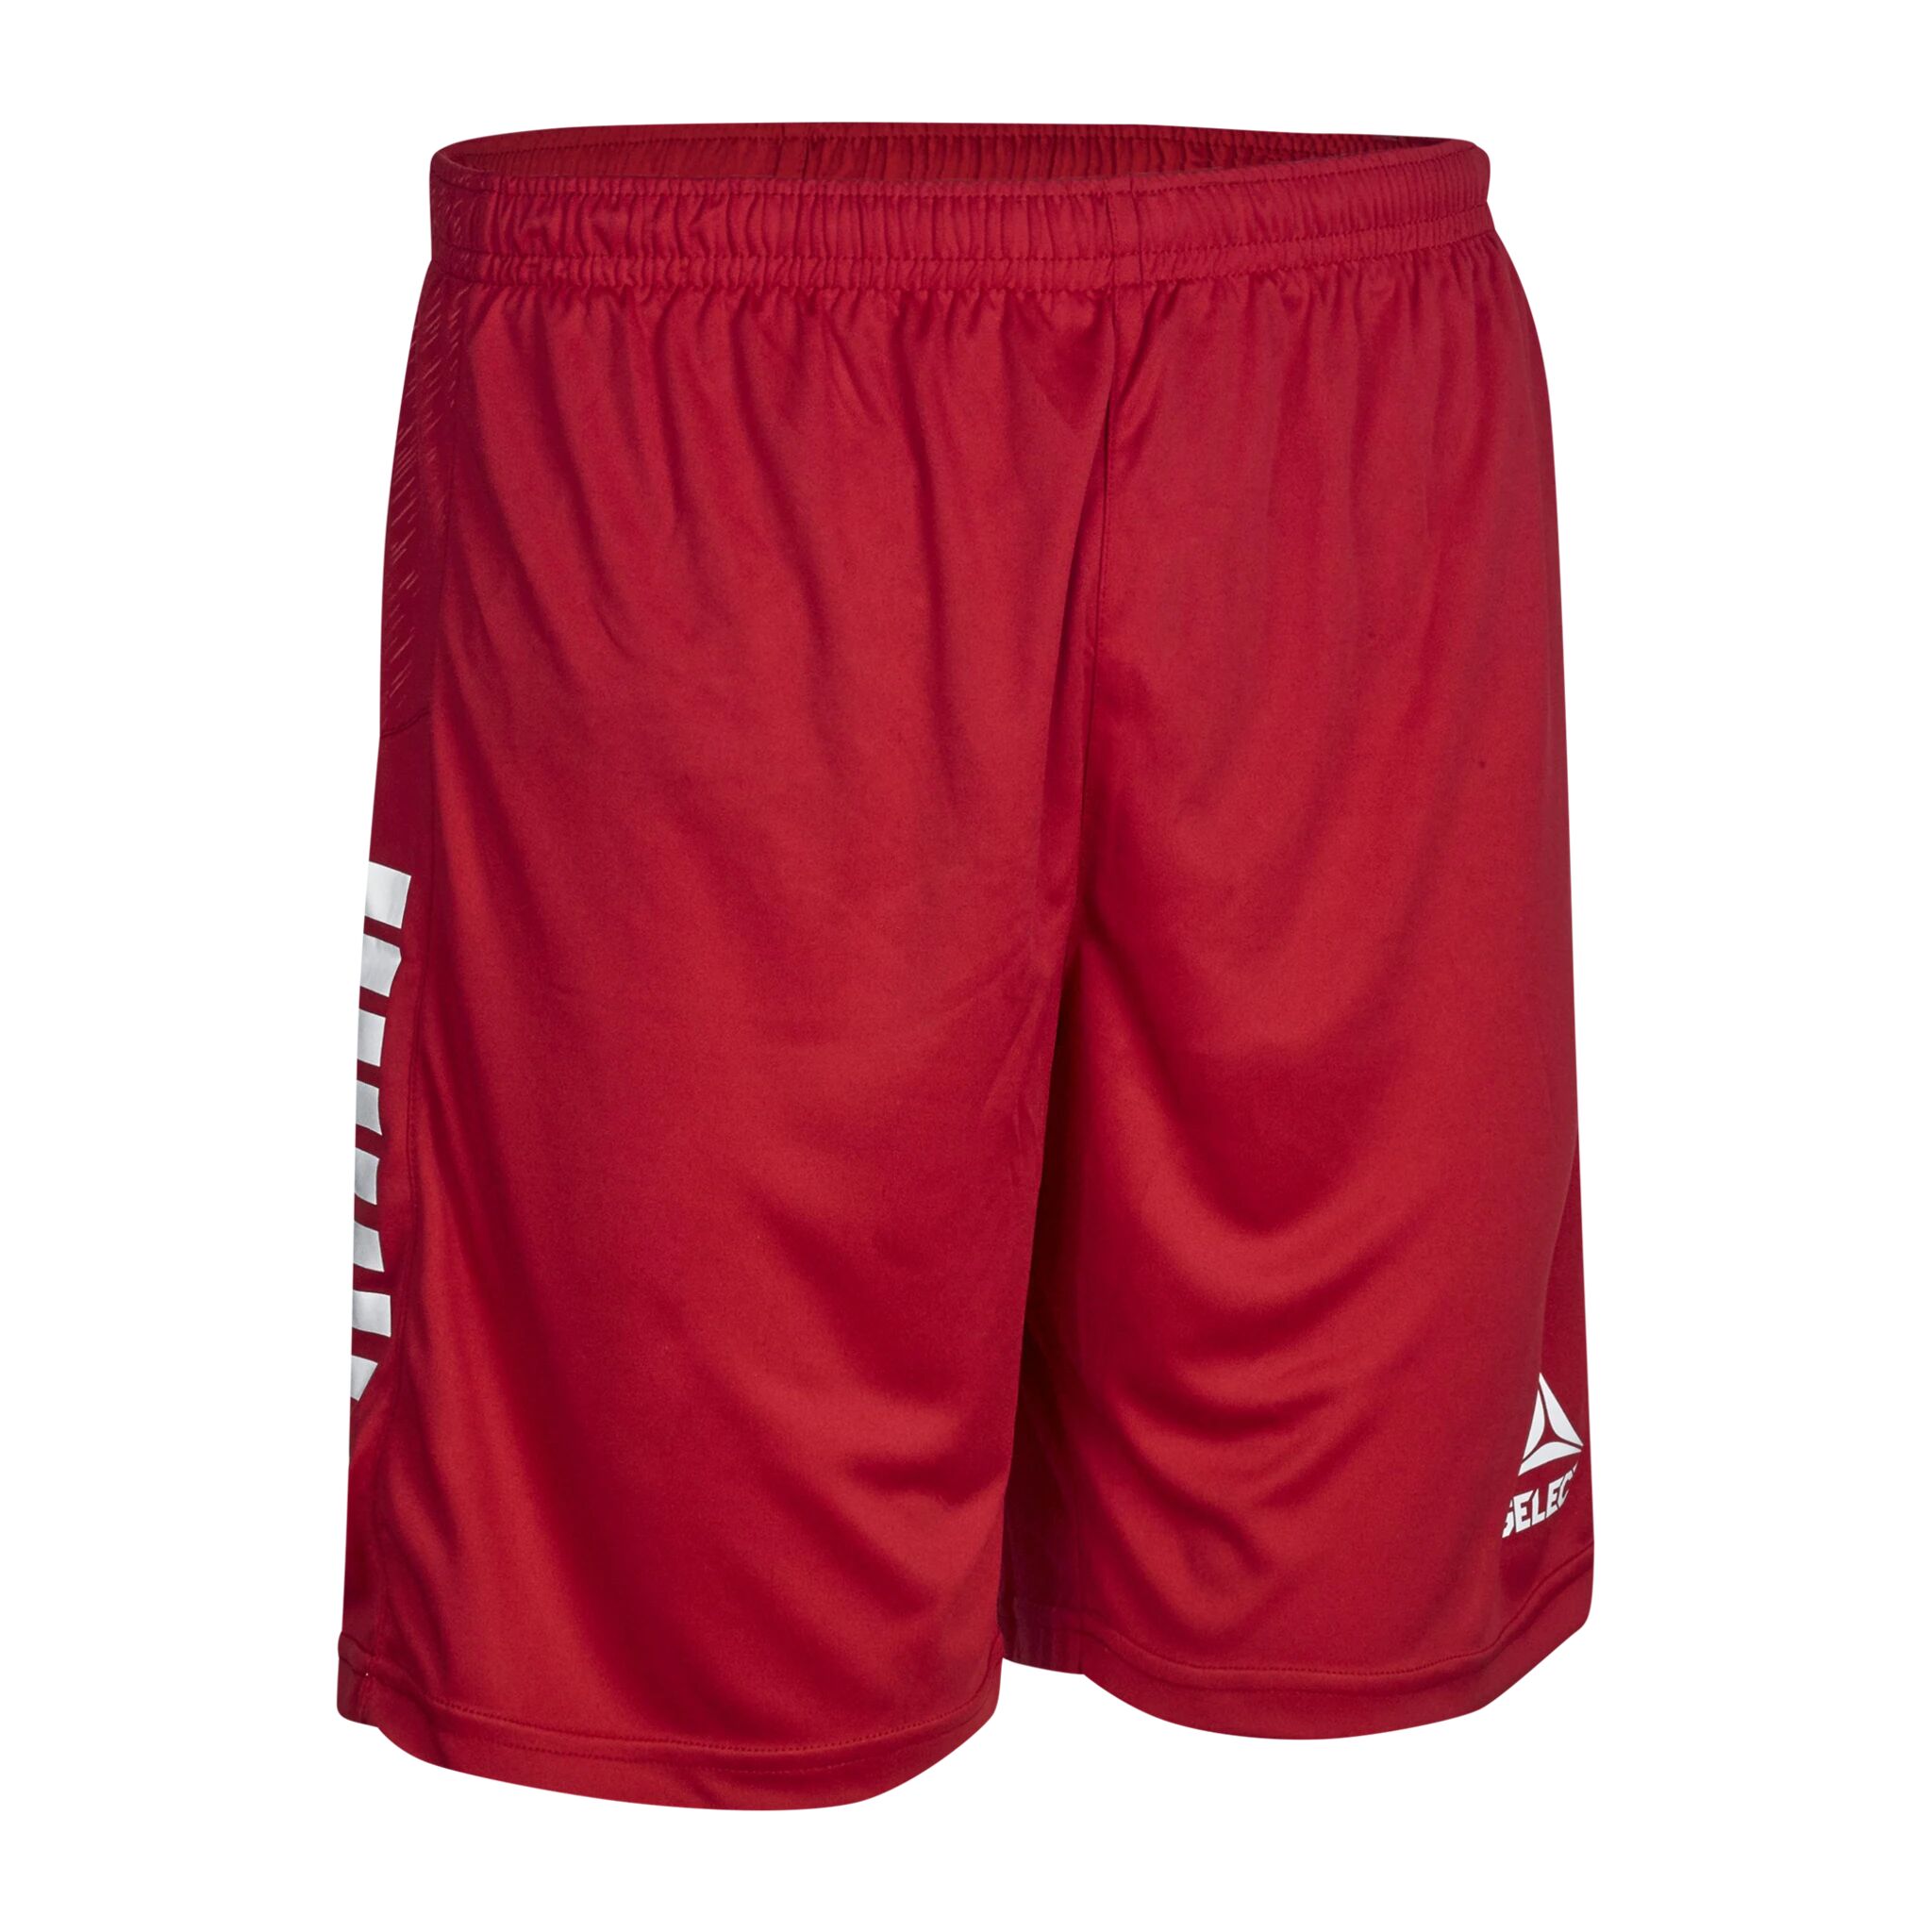 Select Player shorts Spain, shorts unisex 10Y RED